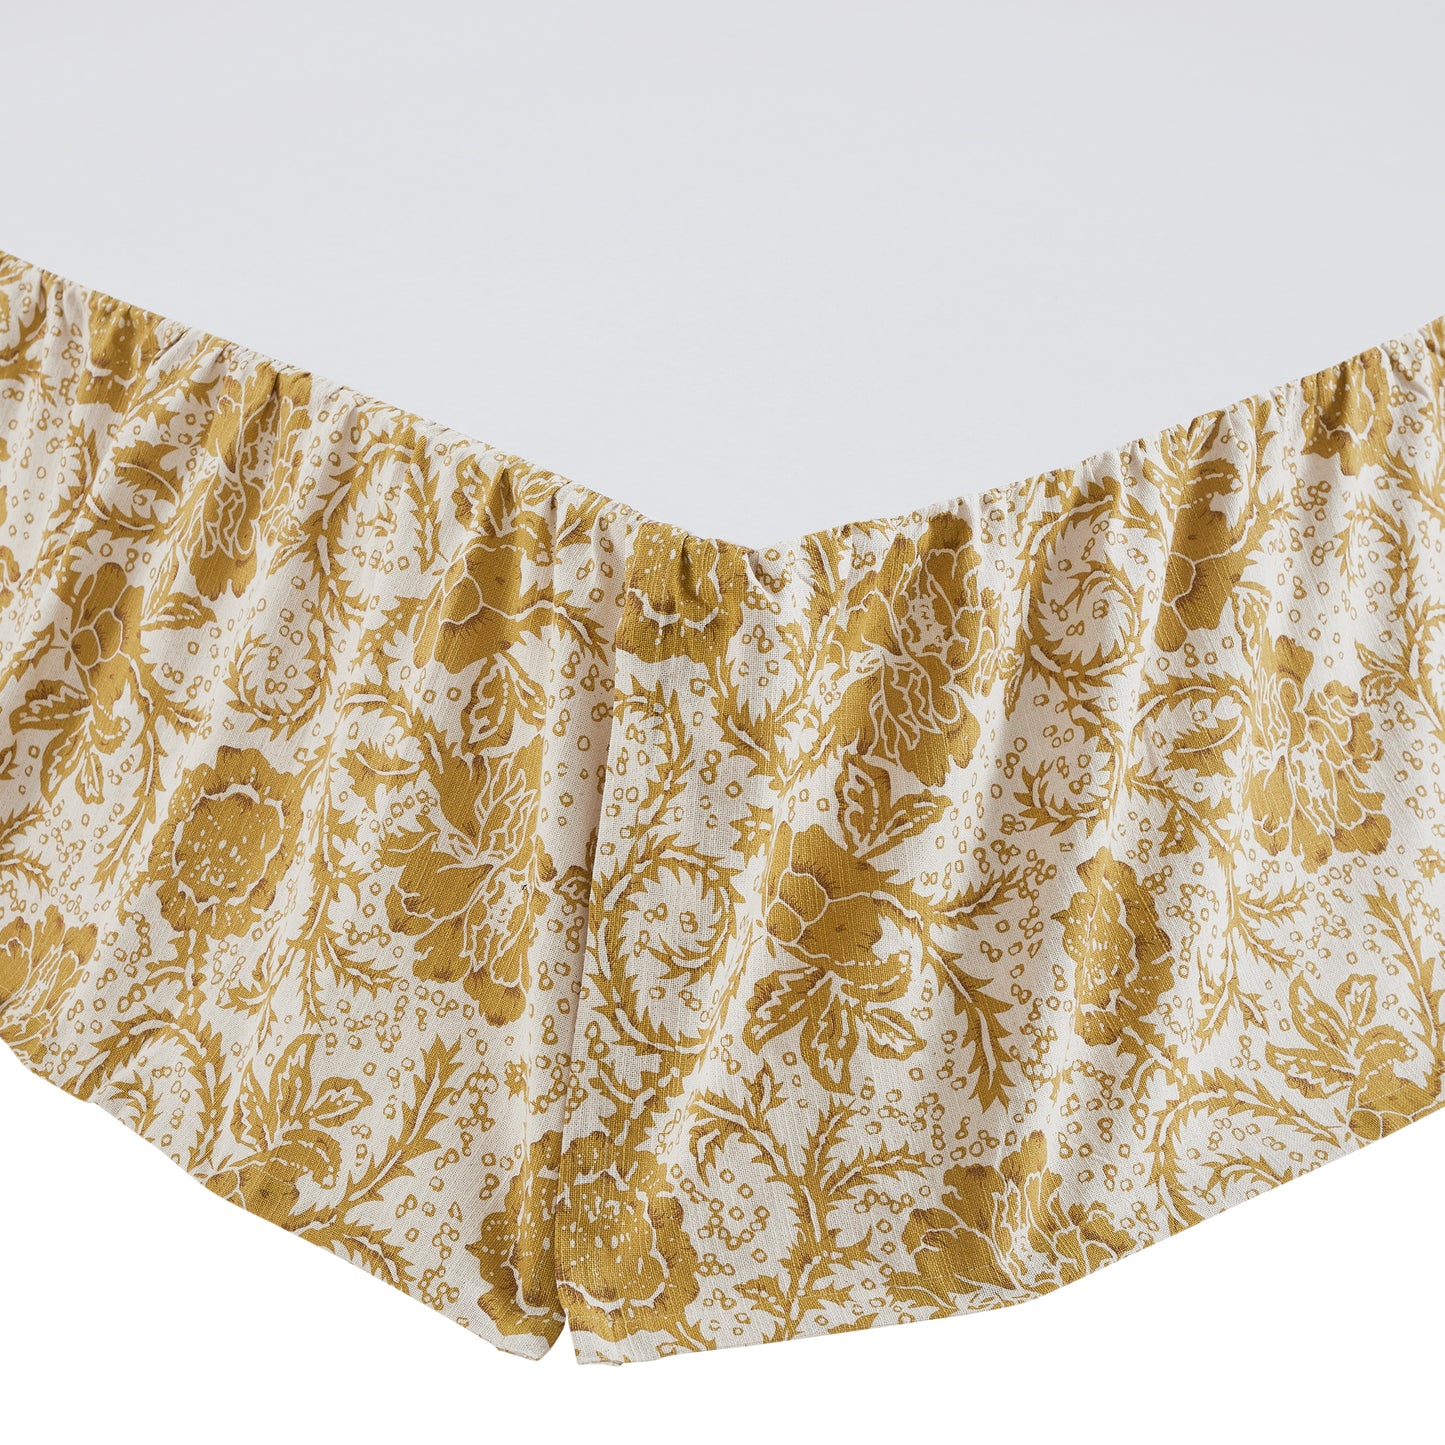 81190-Dorset-Gold-Floral-Queen-Bed-Skirt-60x80x16-image-5